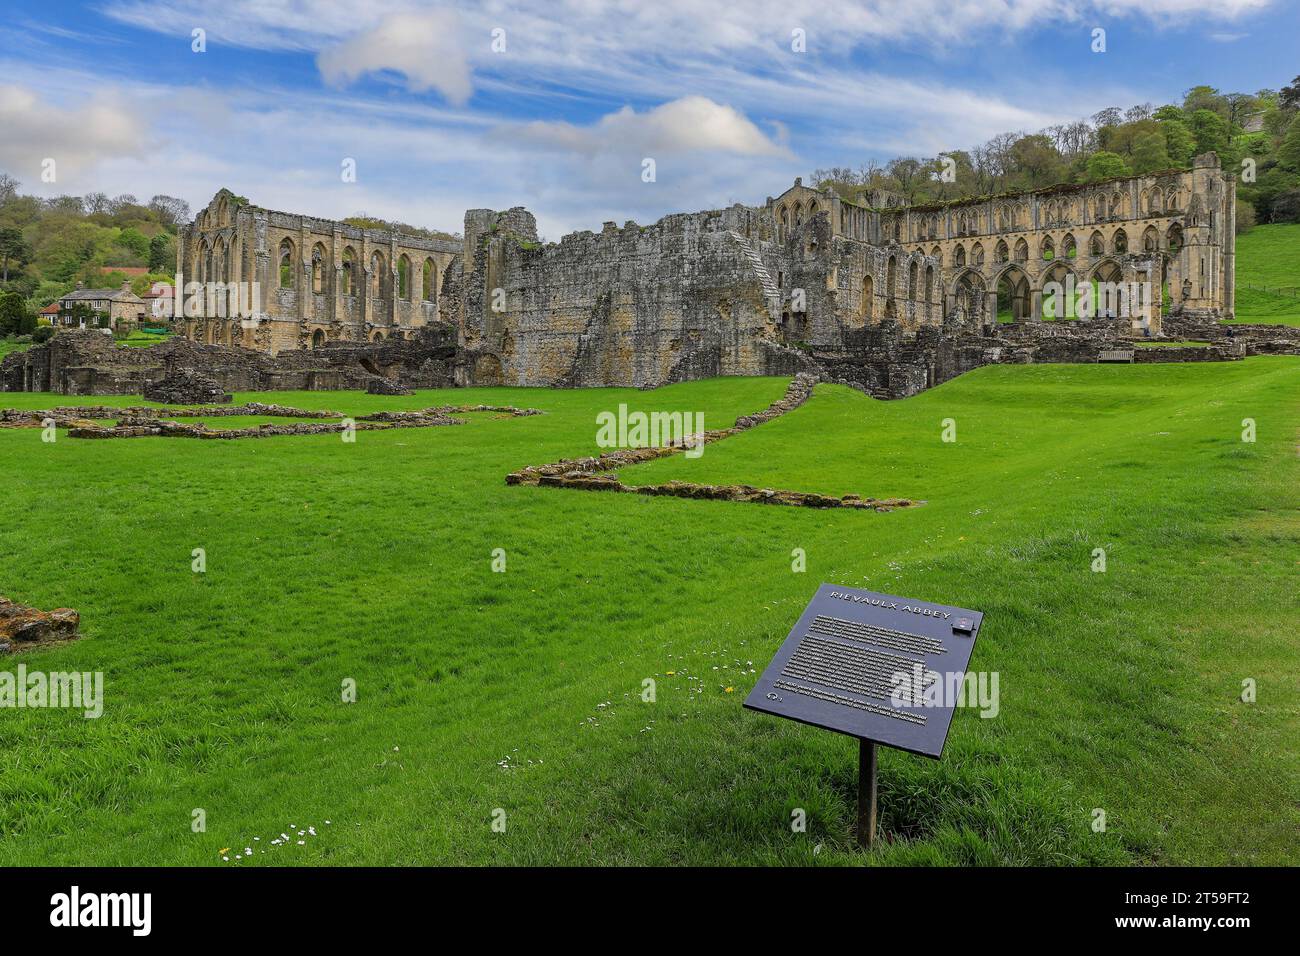 The ruins of the church at Rievaulx Abbey, Rievaulx, near Helmsley, in the North York Moors National Park, North Yorkshire, England, UK Stock Photo